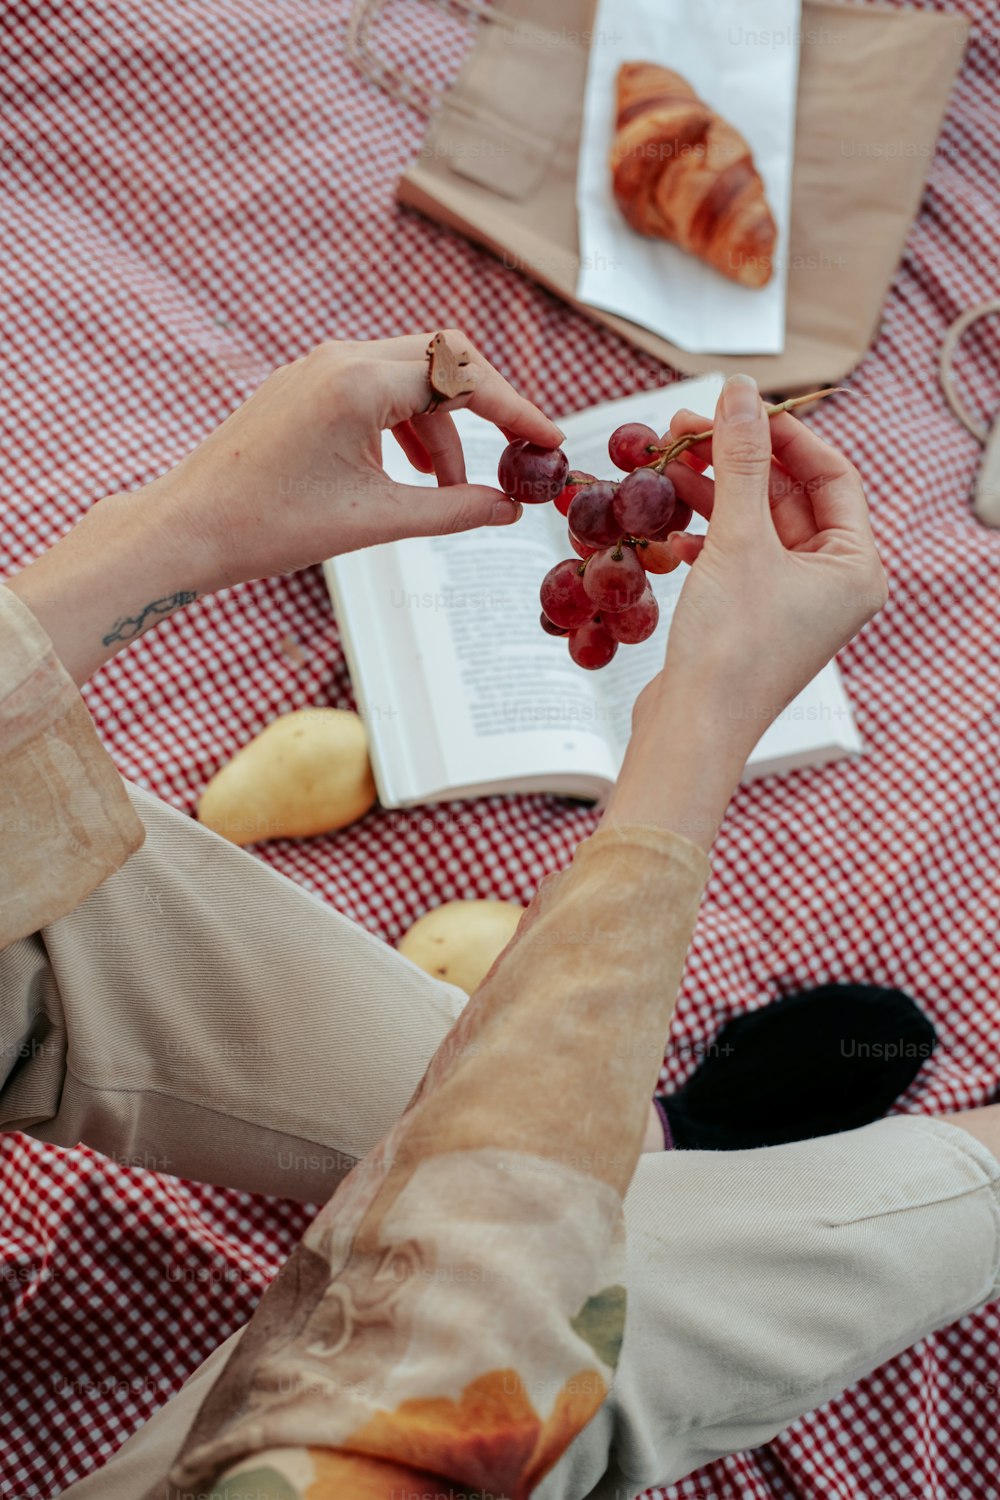 a woman sitting at a table with a book and grapes